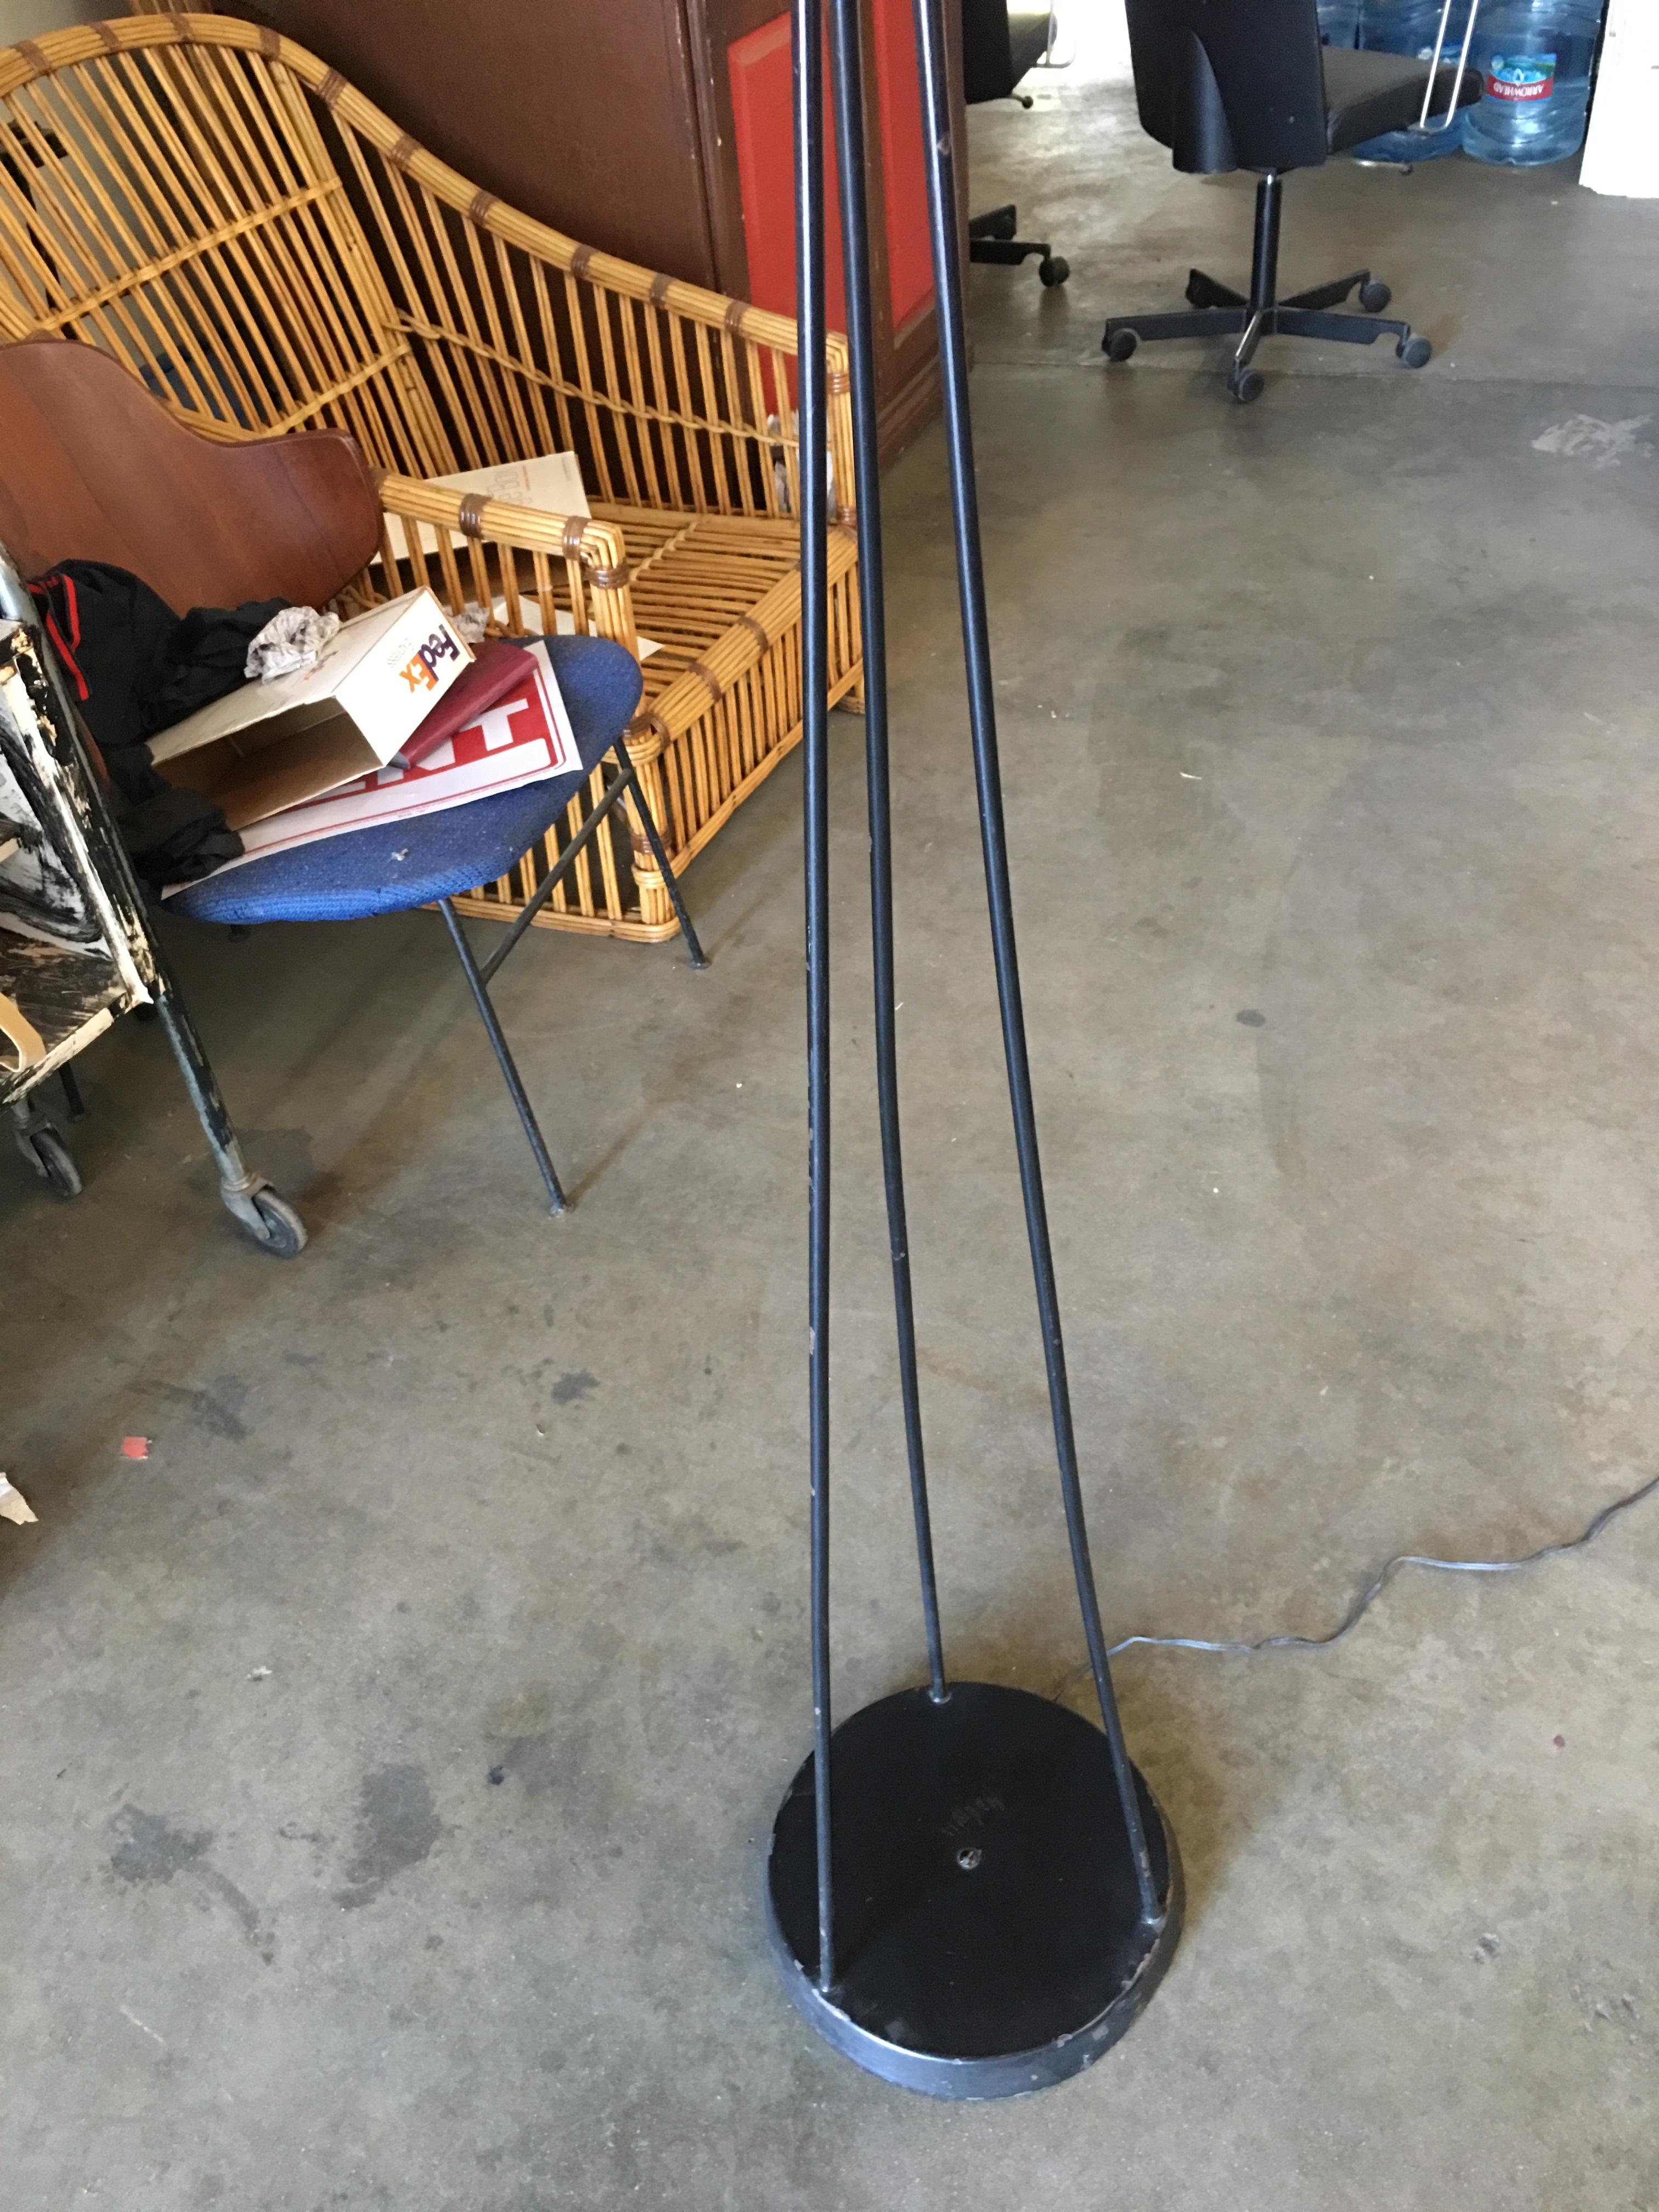 black and gold tripod floor lamp